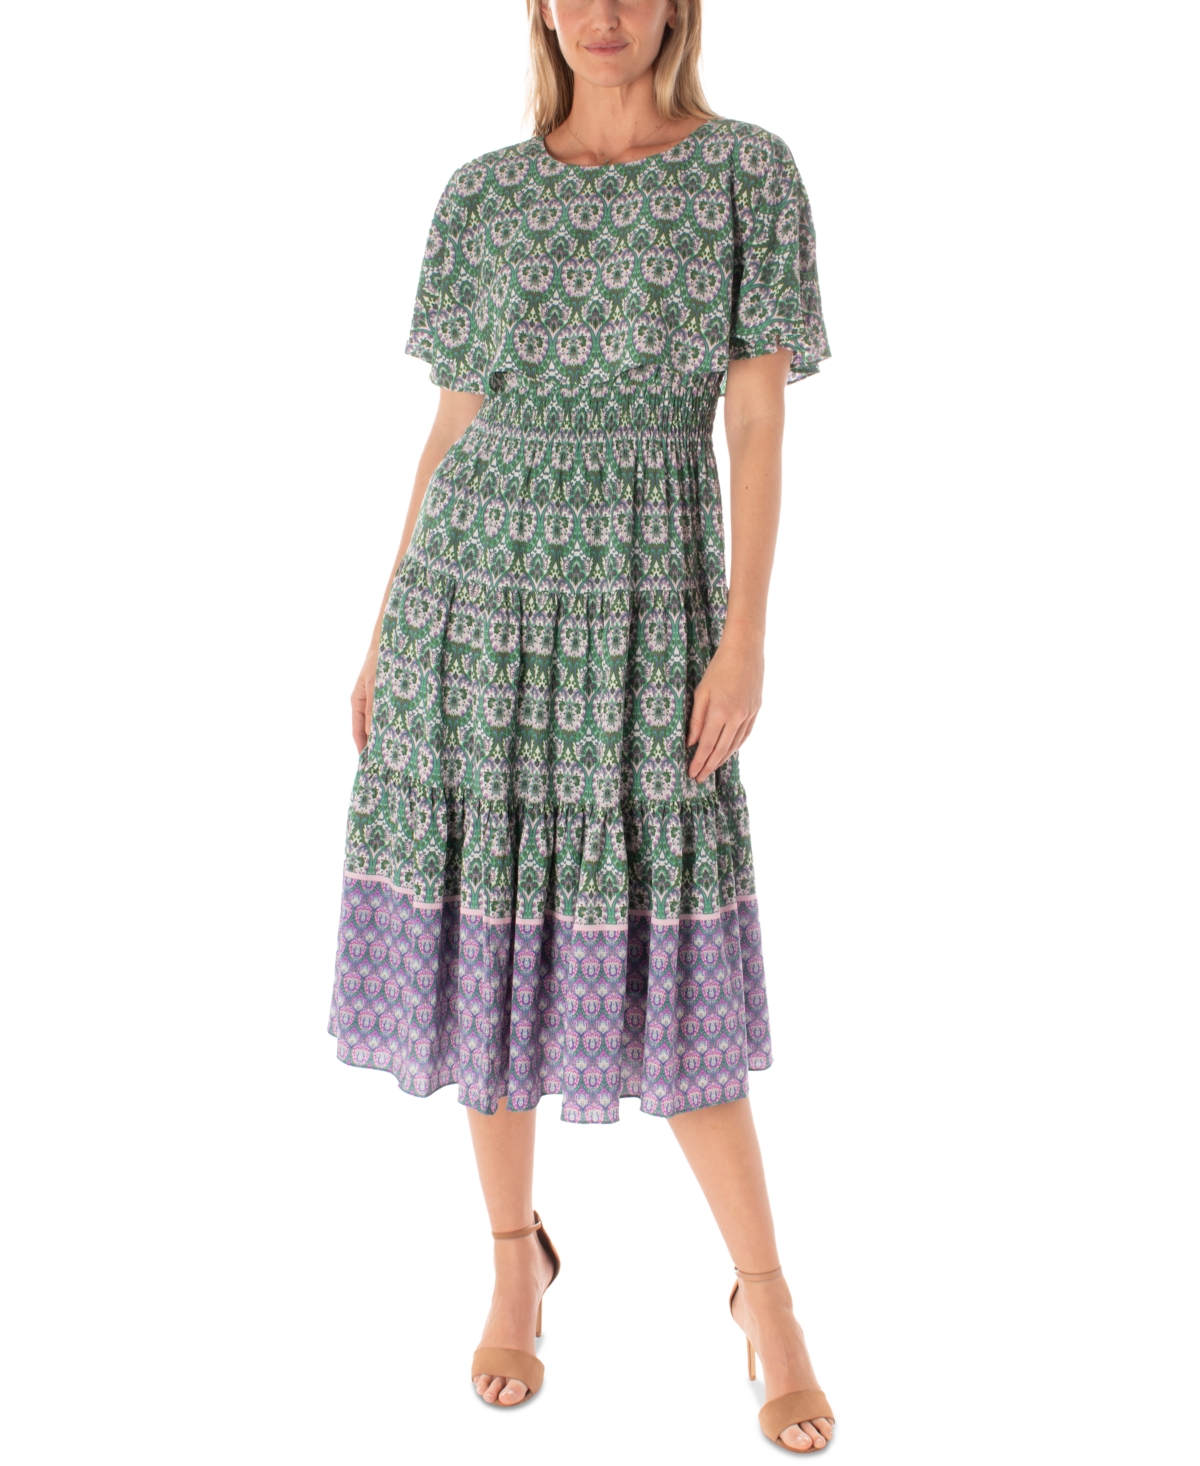 Women's Printed Tiered Fit & Flare Dress - Peacock/Violet